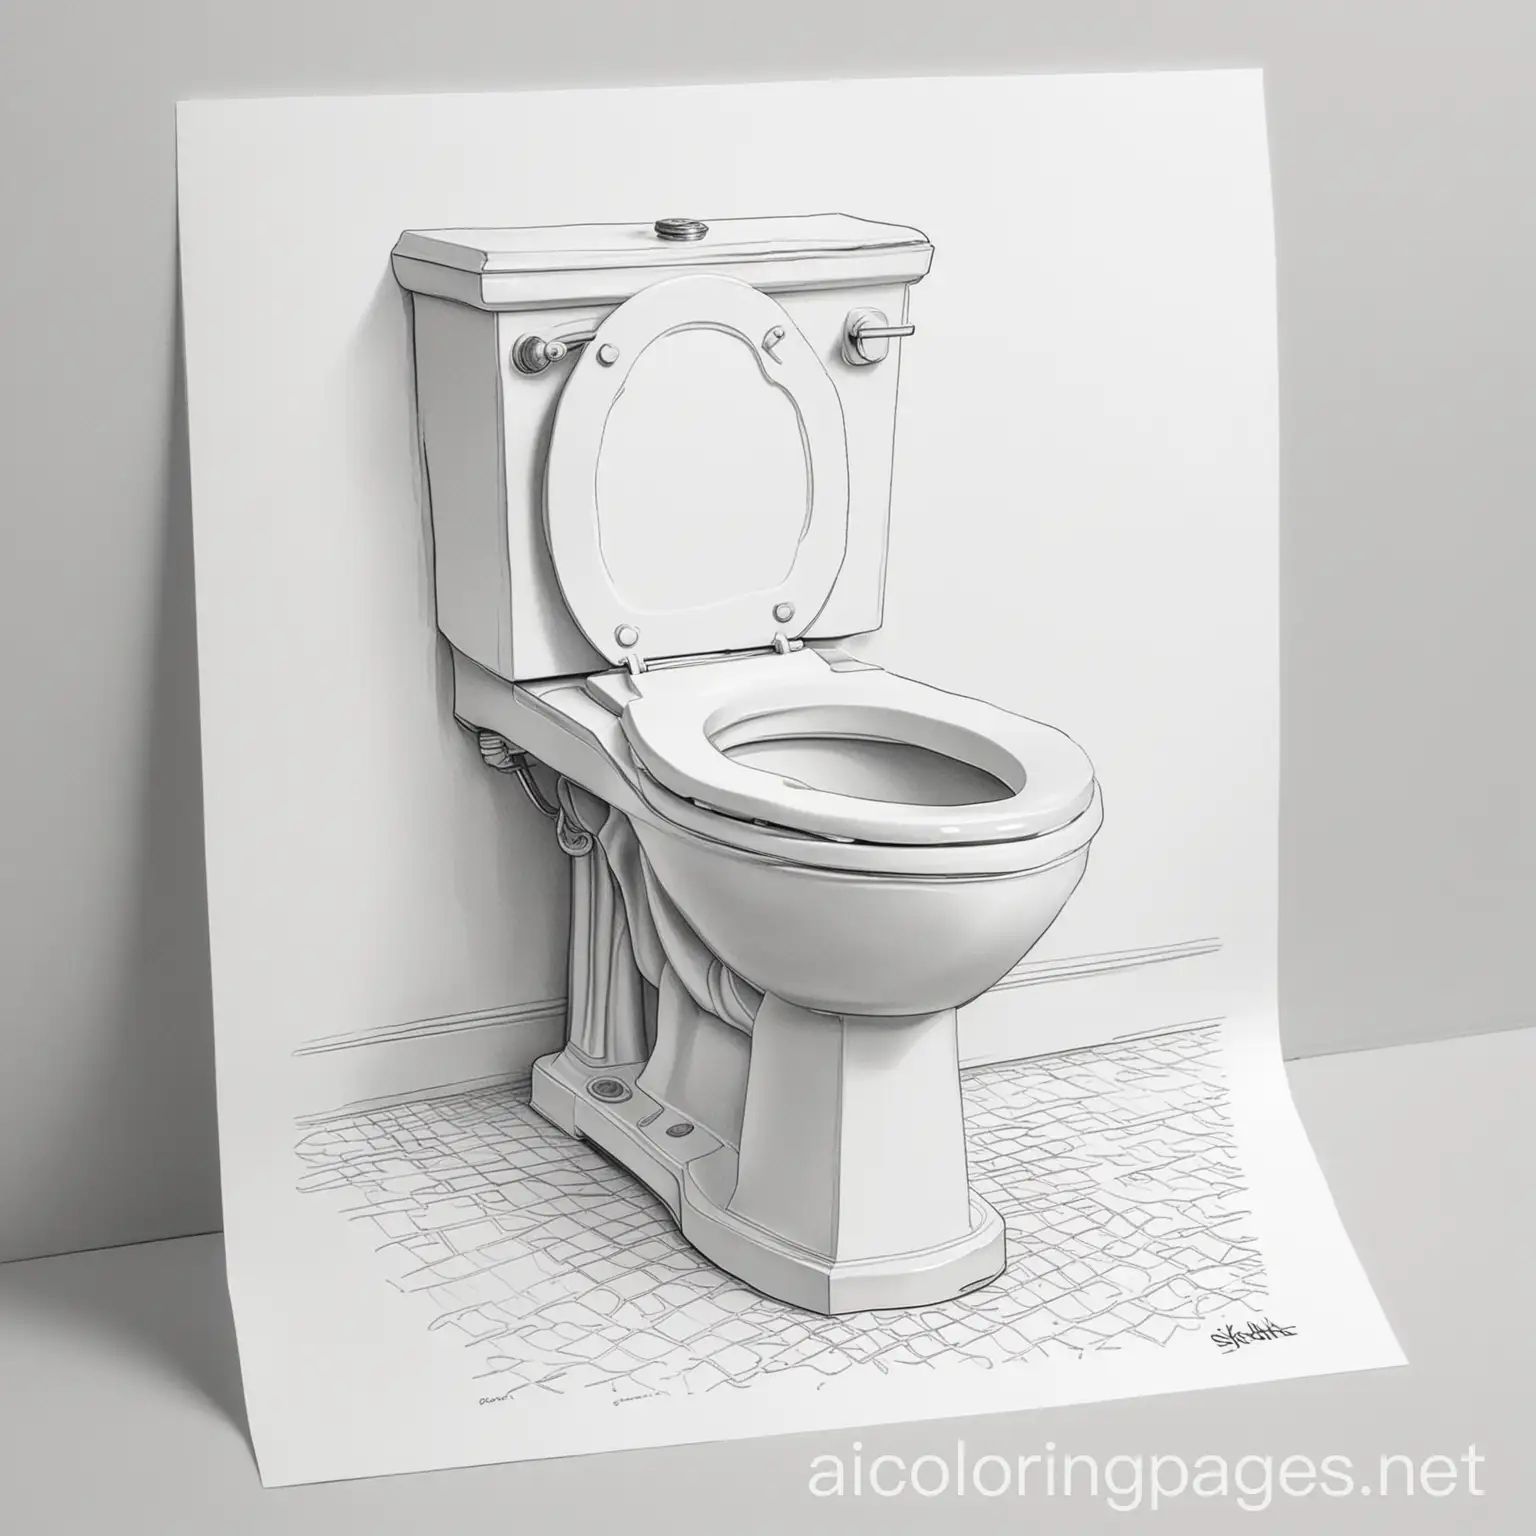 skibbitti toilet 
, Coloring Page, black and white, line art, white background, Simplicity, Ample White Space. The background of the coloring page is plain white to make it easy for young children to color within the lines. The outlines of all the subjects are easy to distinguish, making it simple for kids to color without too much difficulty